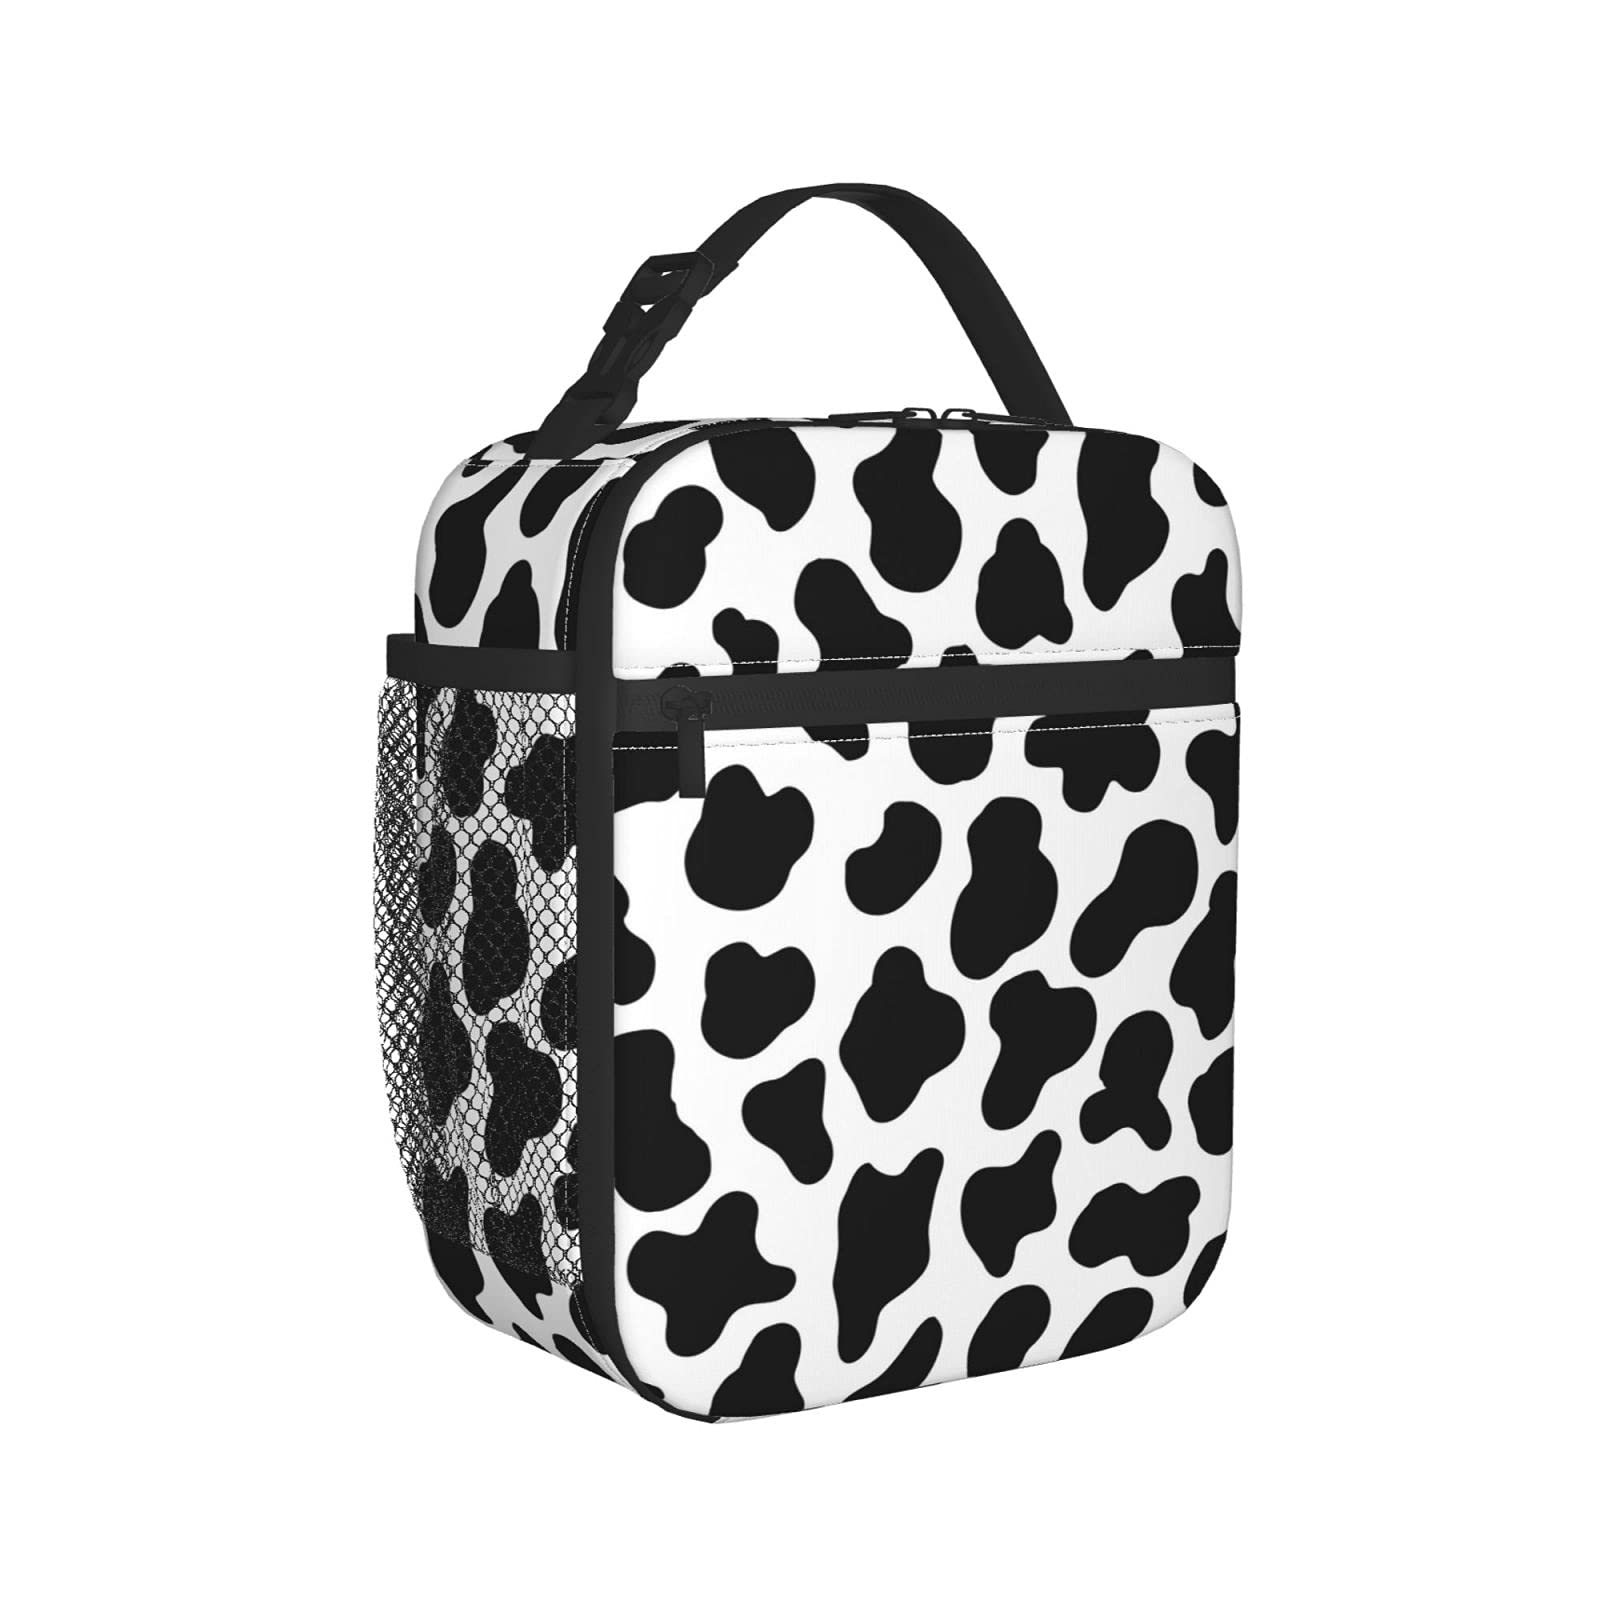 Insulated Lunch Box for Men and Women, Portable and Reusable Lunch Bag for Office Work and Picnic, Cow Print